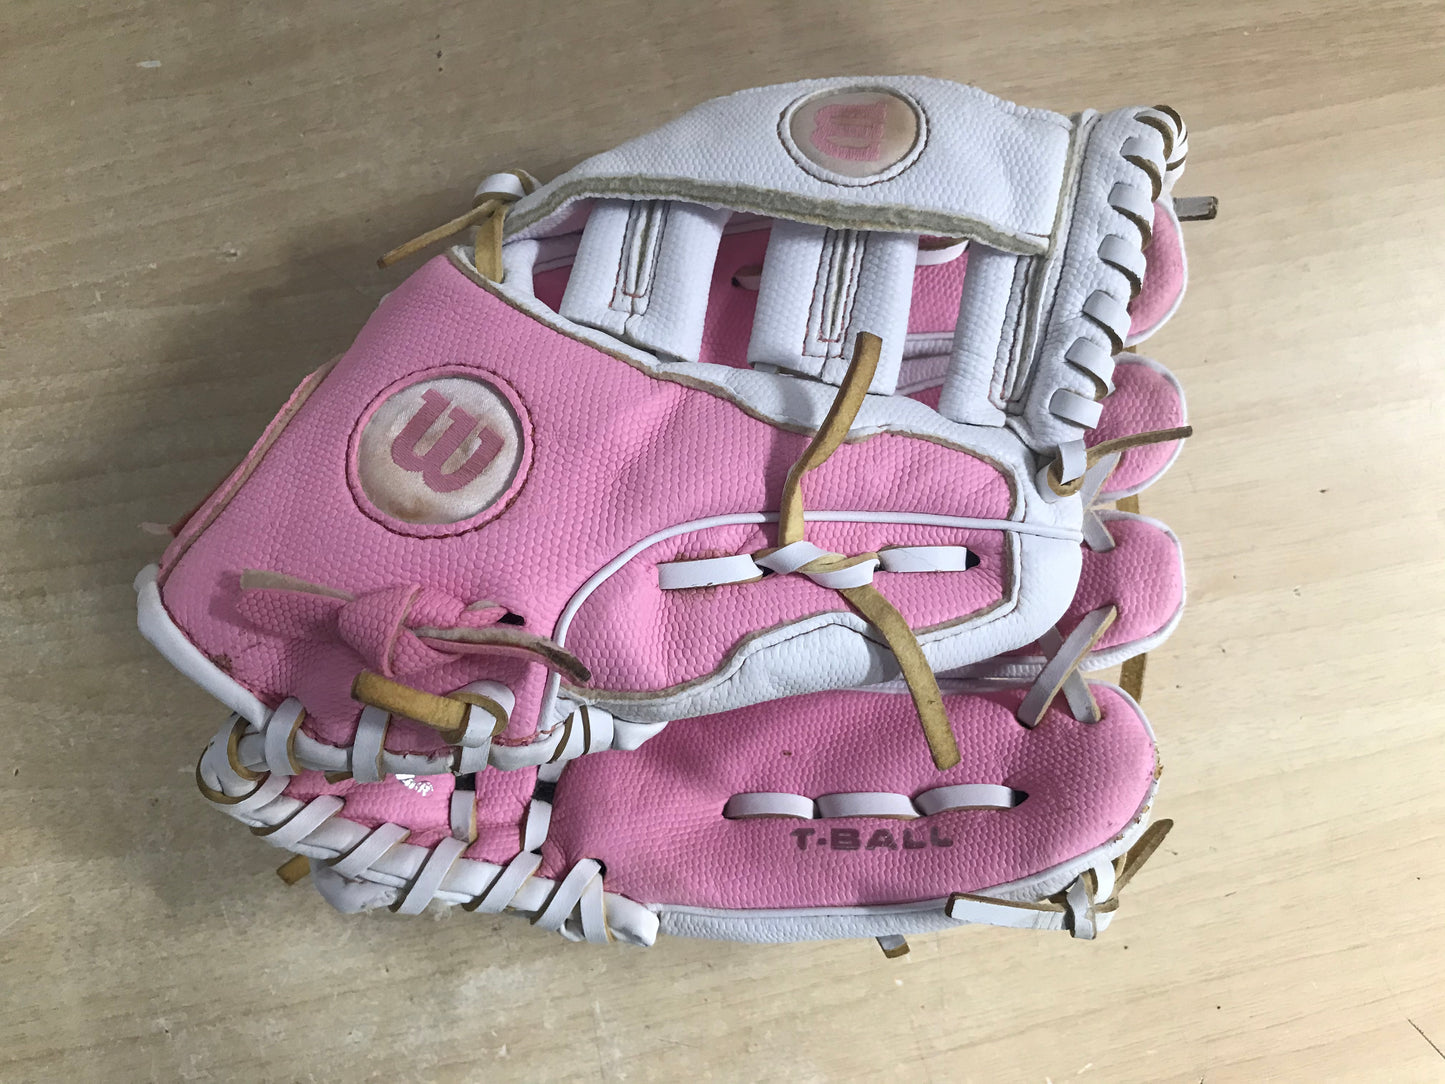 Baseball Glove Child Size 10 inch Wilson Pink White Soft Bends Well Fits on Left Hand